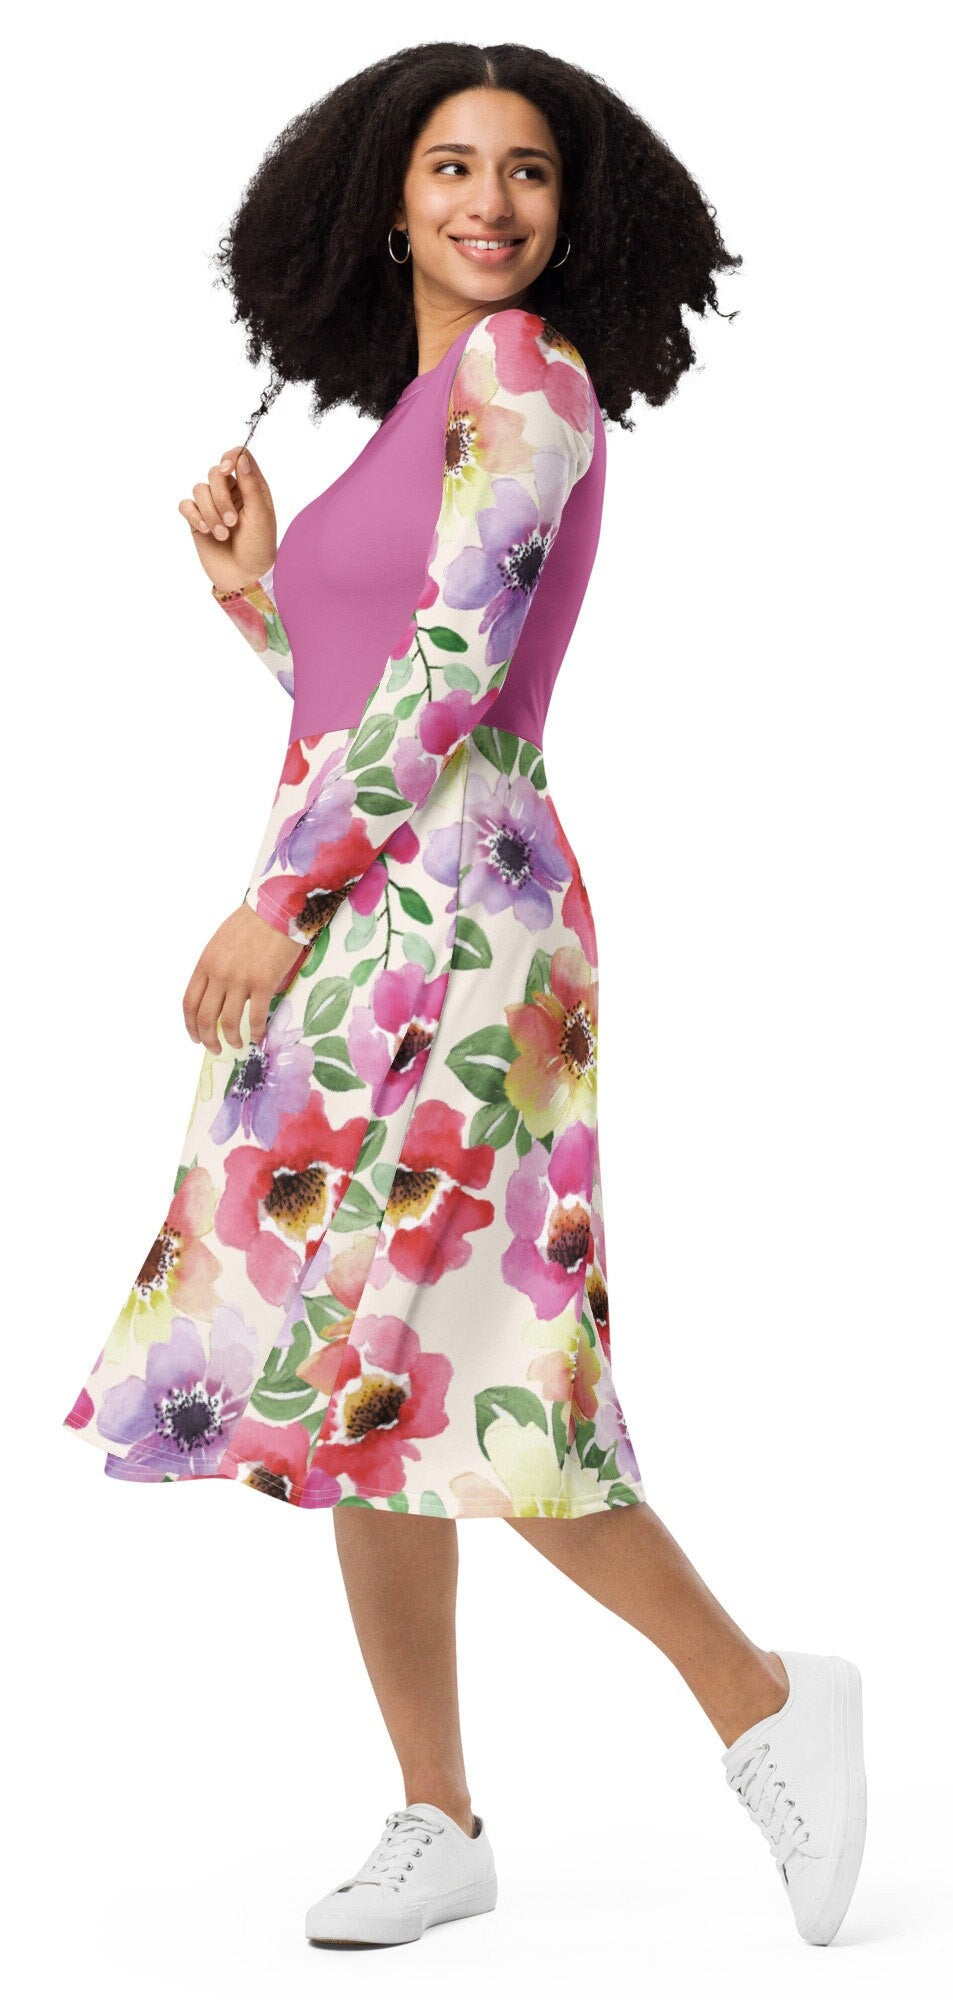 All-over print Pink Floral Plus Size long sleeve midi dress, Modest Midi Floral Dress, Oversized Ployester Colorful Dress